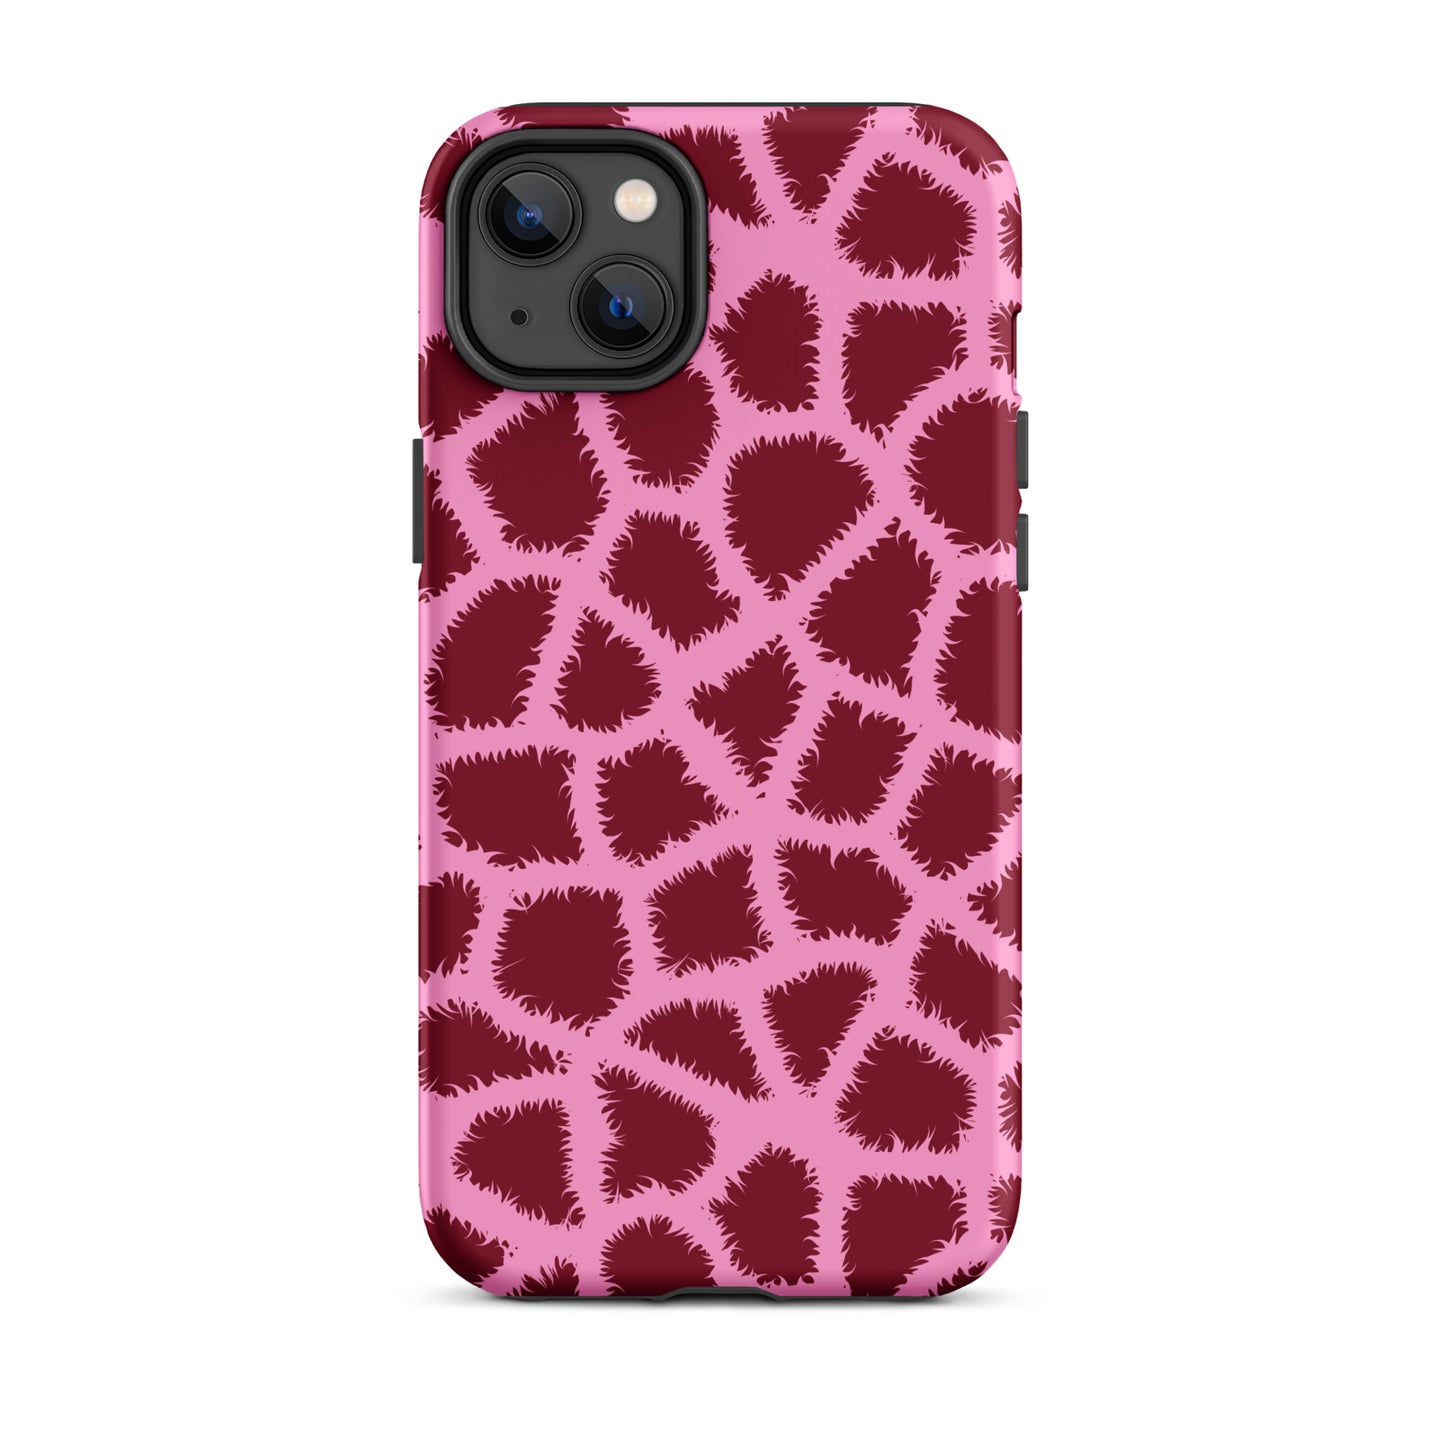 That's a Giraffe of a Different Color iPhone® Case